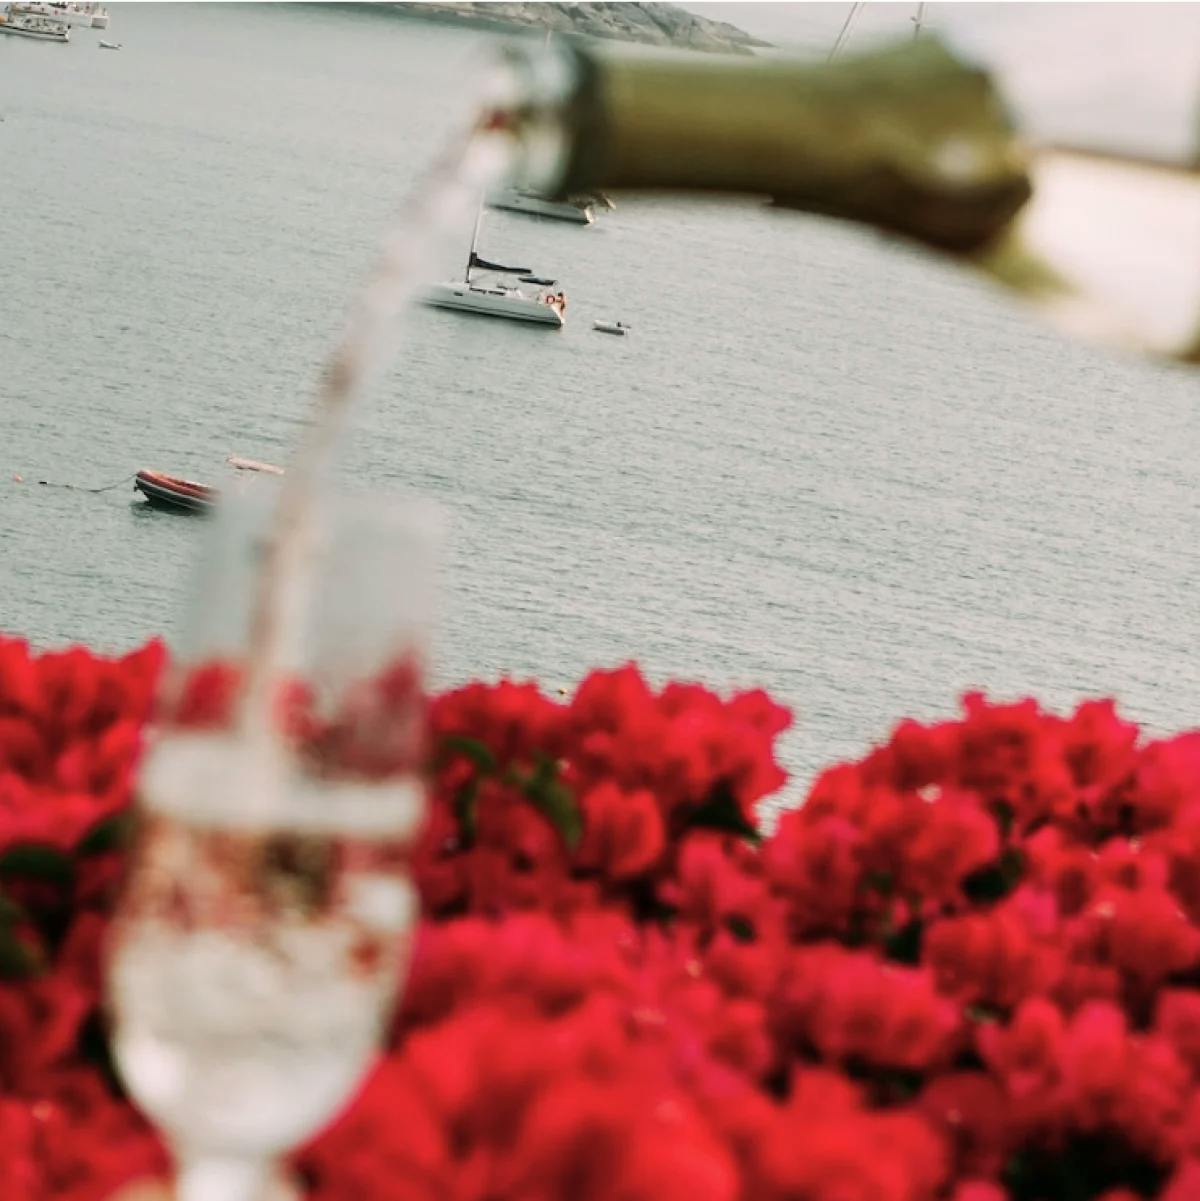 champagne is poured into a flute near a hedge of red flowers